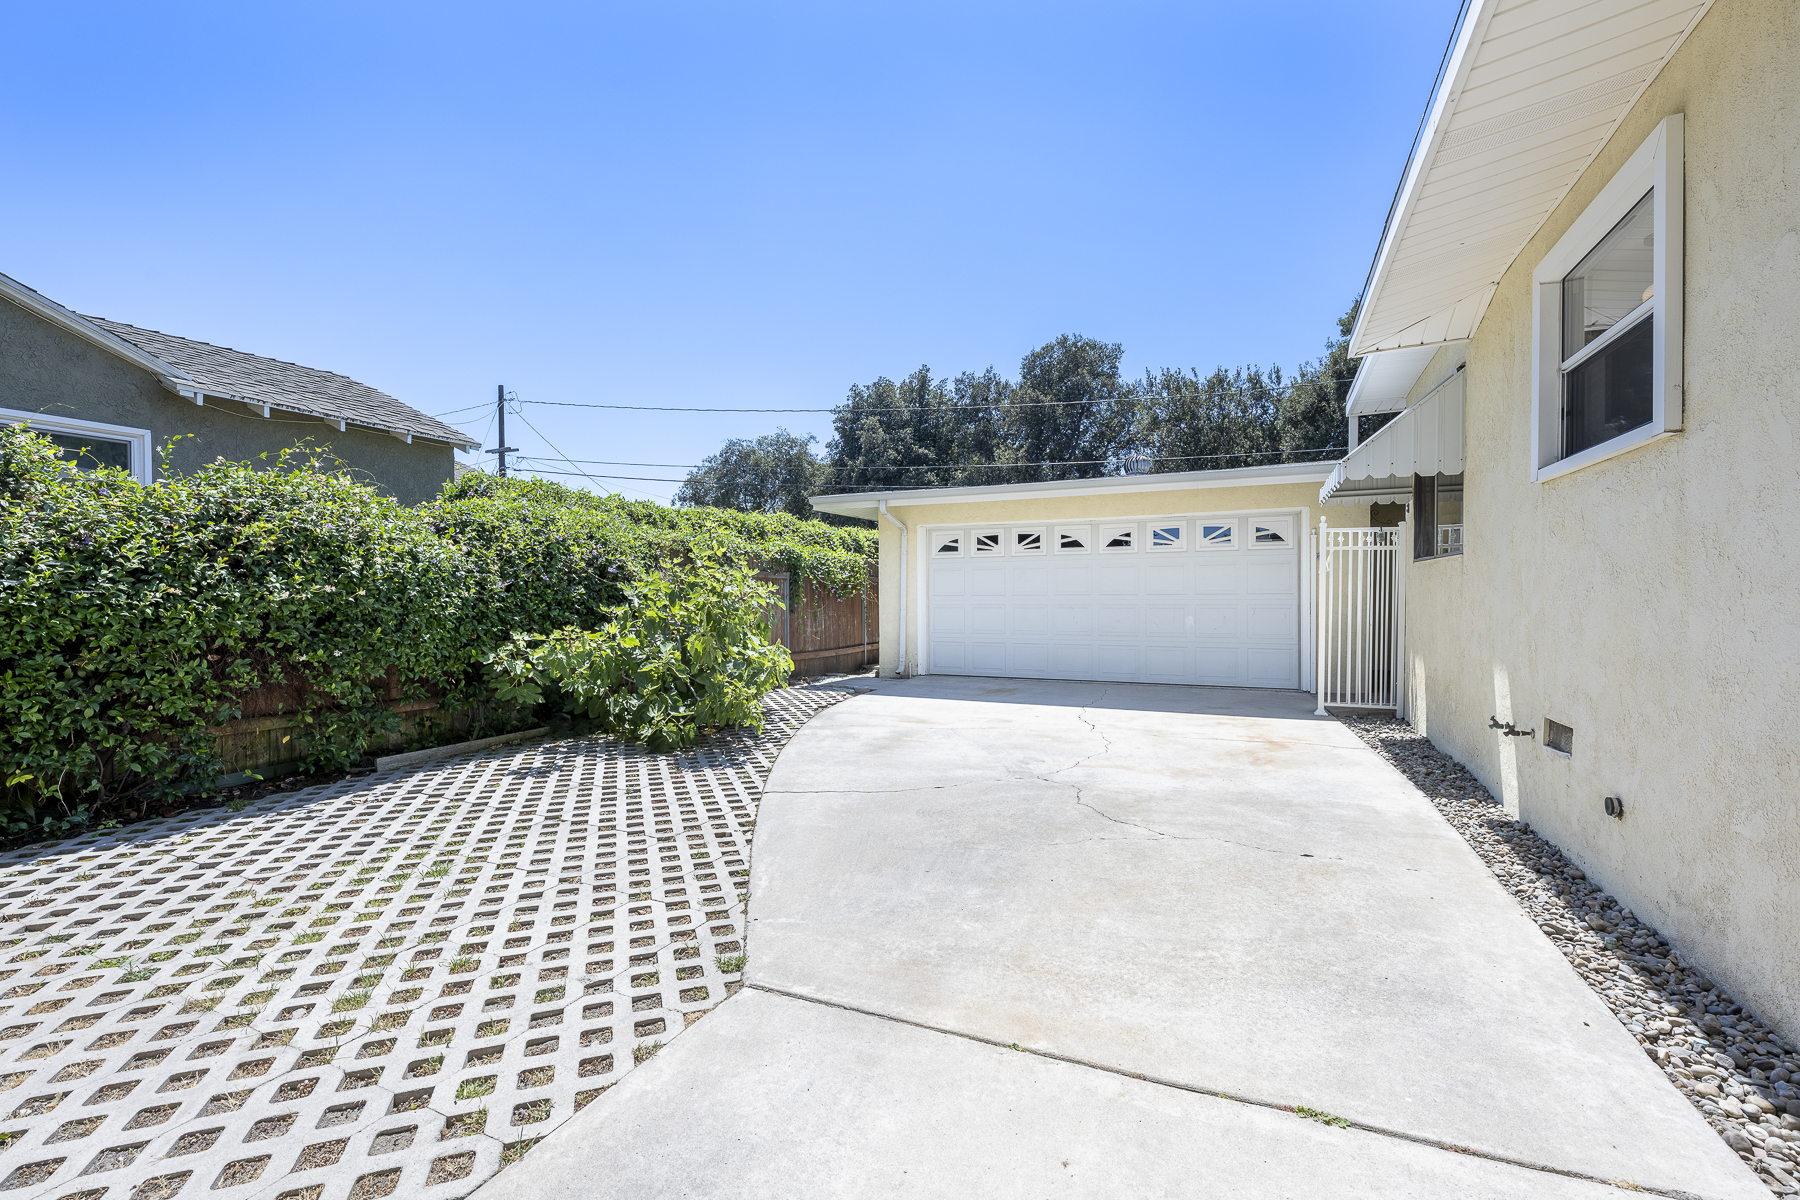 411 Truman Ave, Fullerton, CA 92832: Exterior view of garage and drive way.